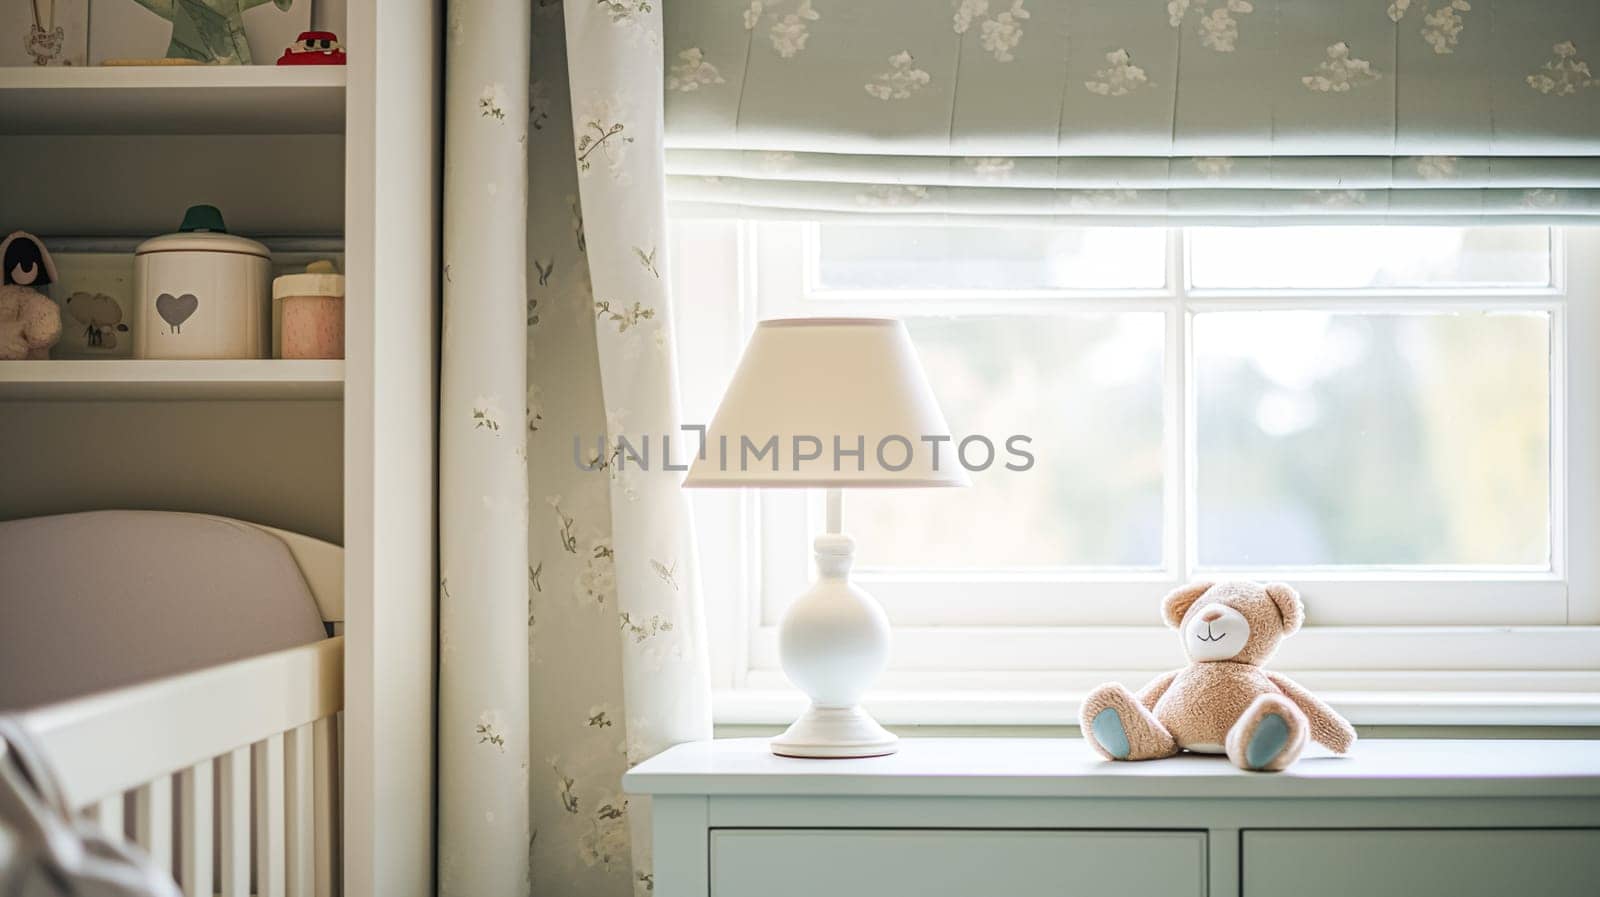 Baby room decor and interior design inspiration in beautiful English countryside style cottage